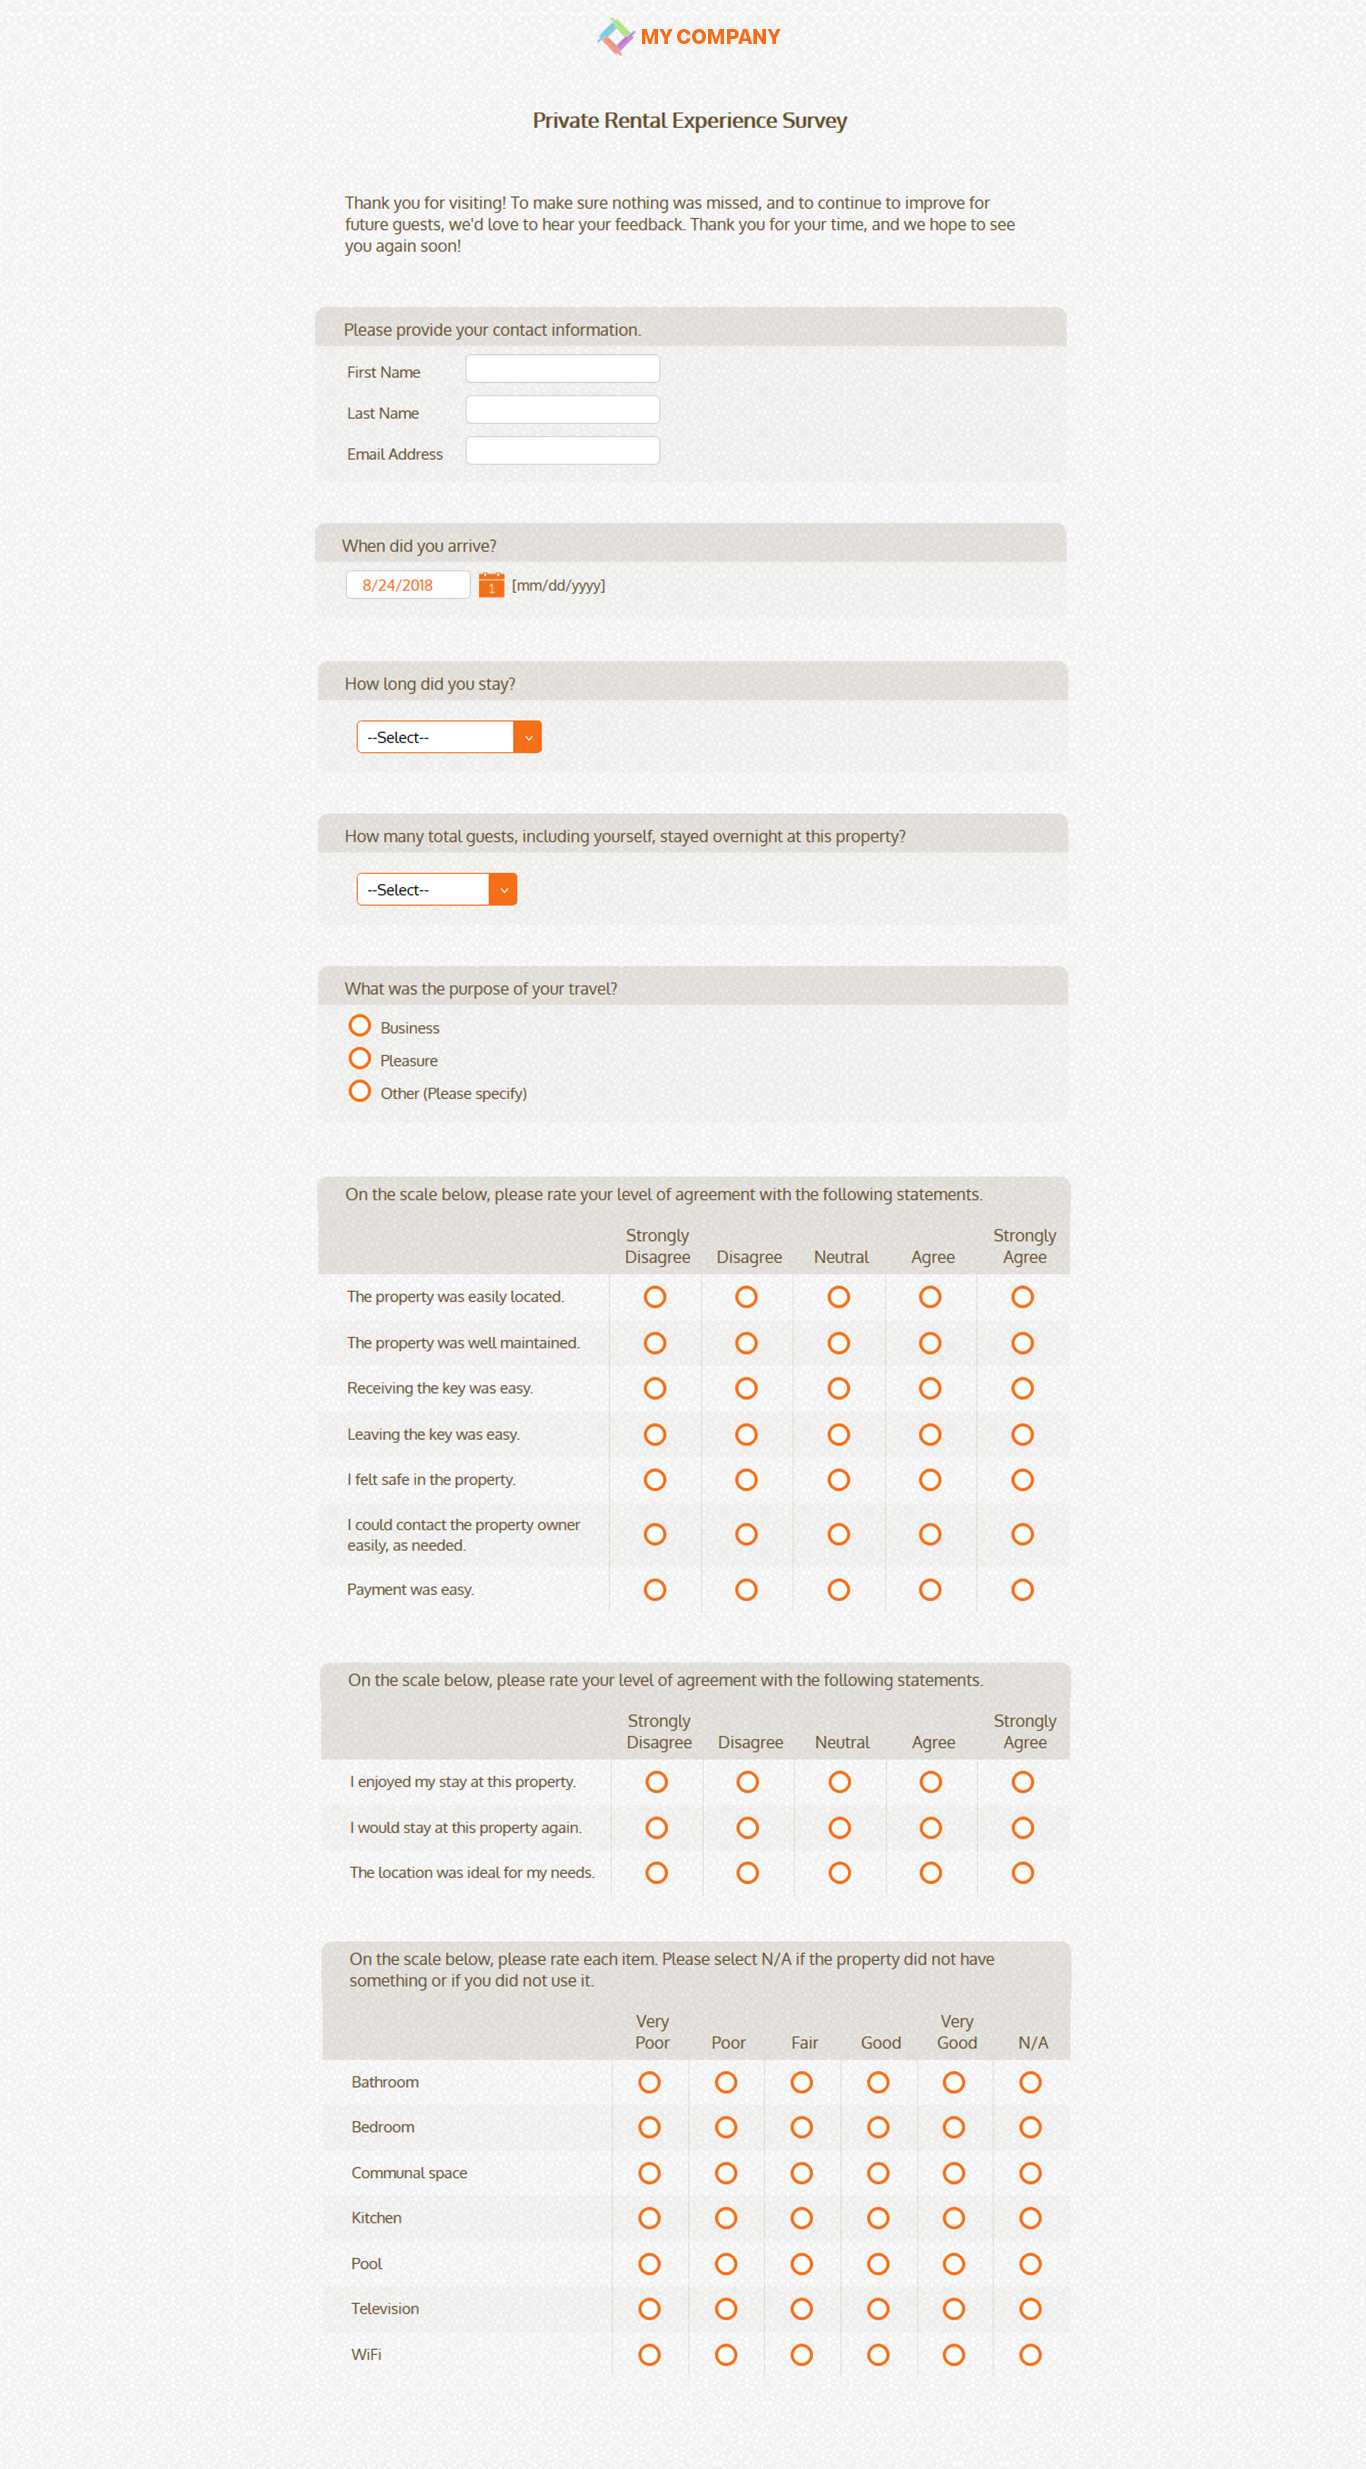 Rental Experience Survey Template [12 Questions] | Sogosurvey Inside Poll Template For Word